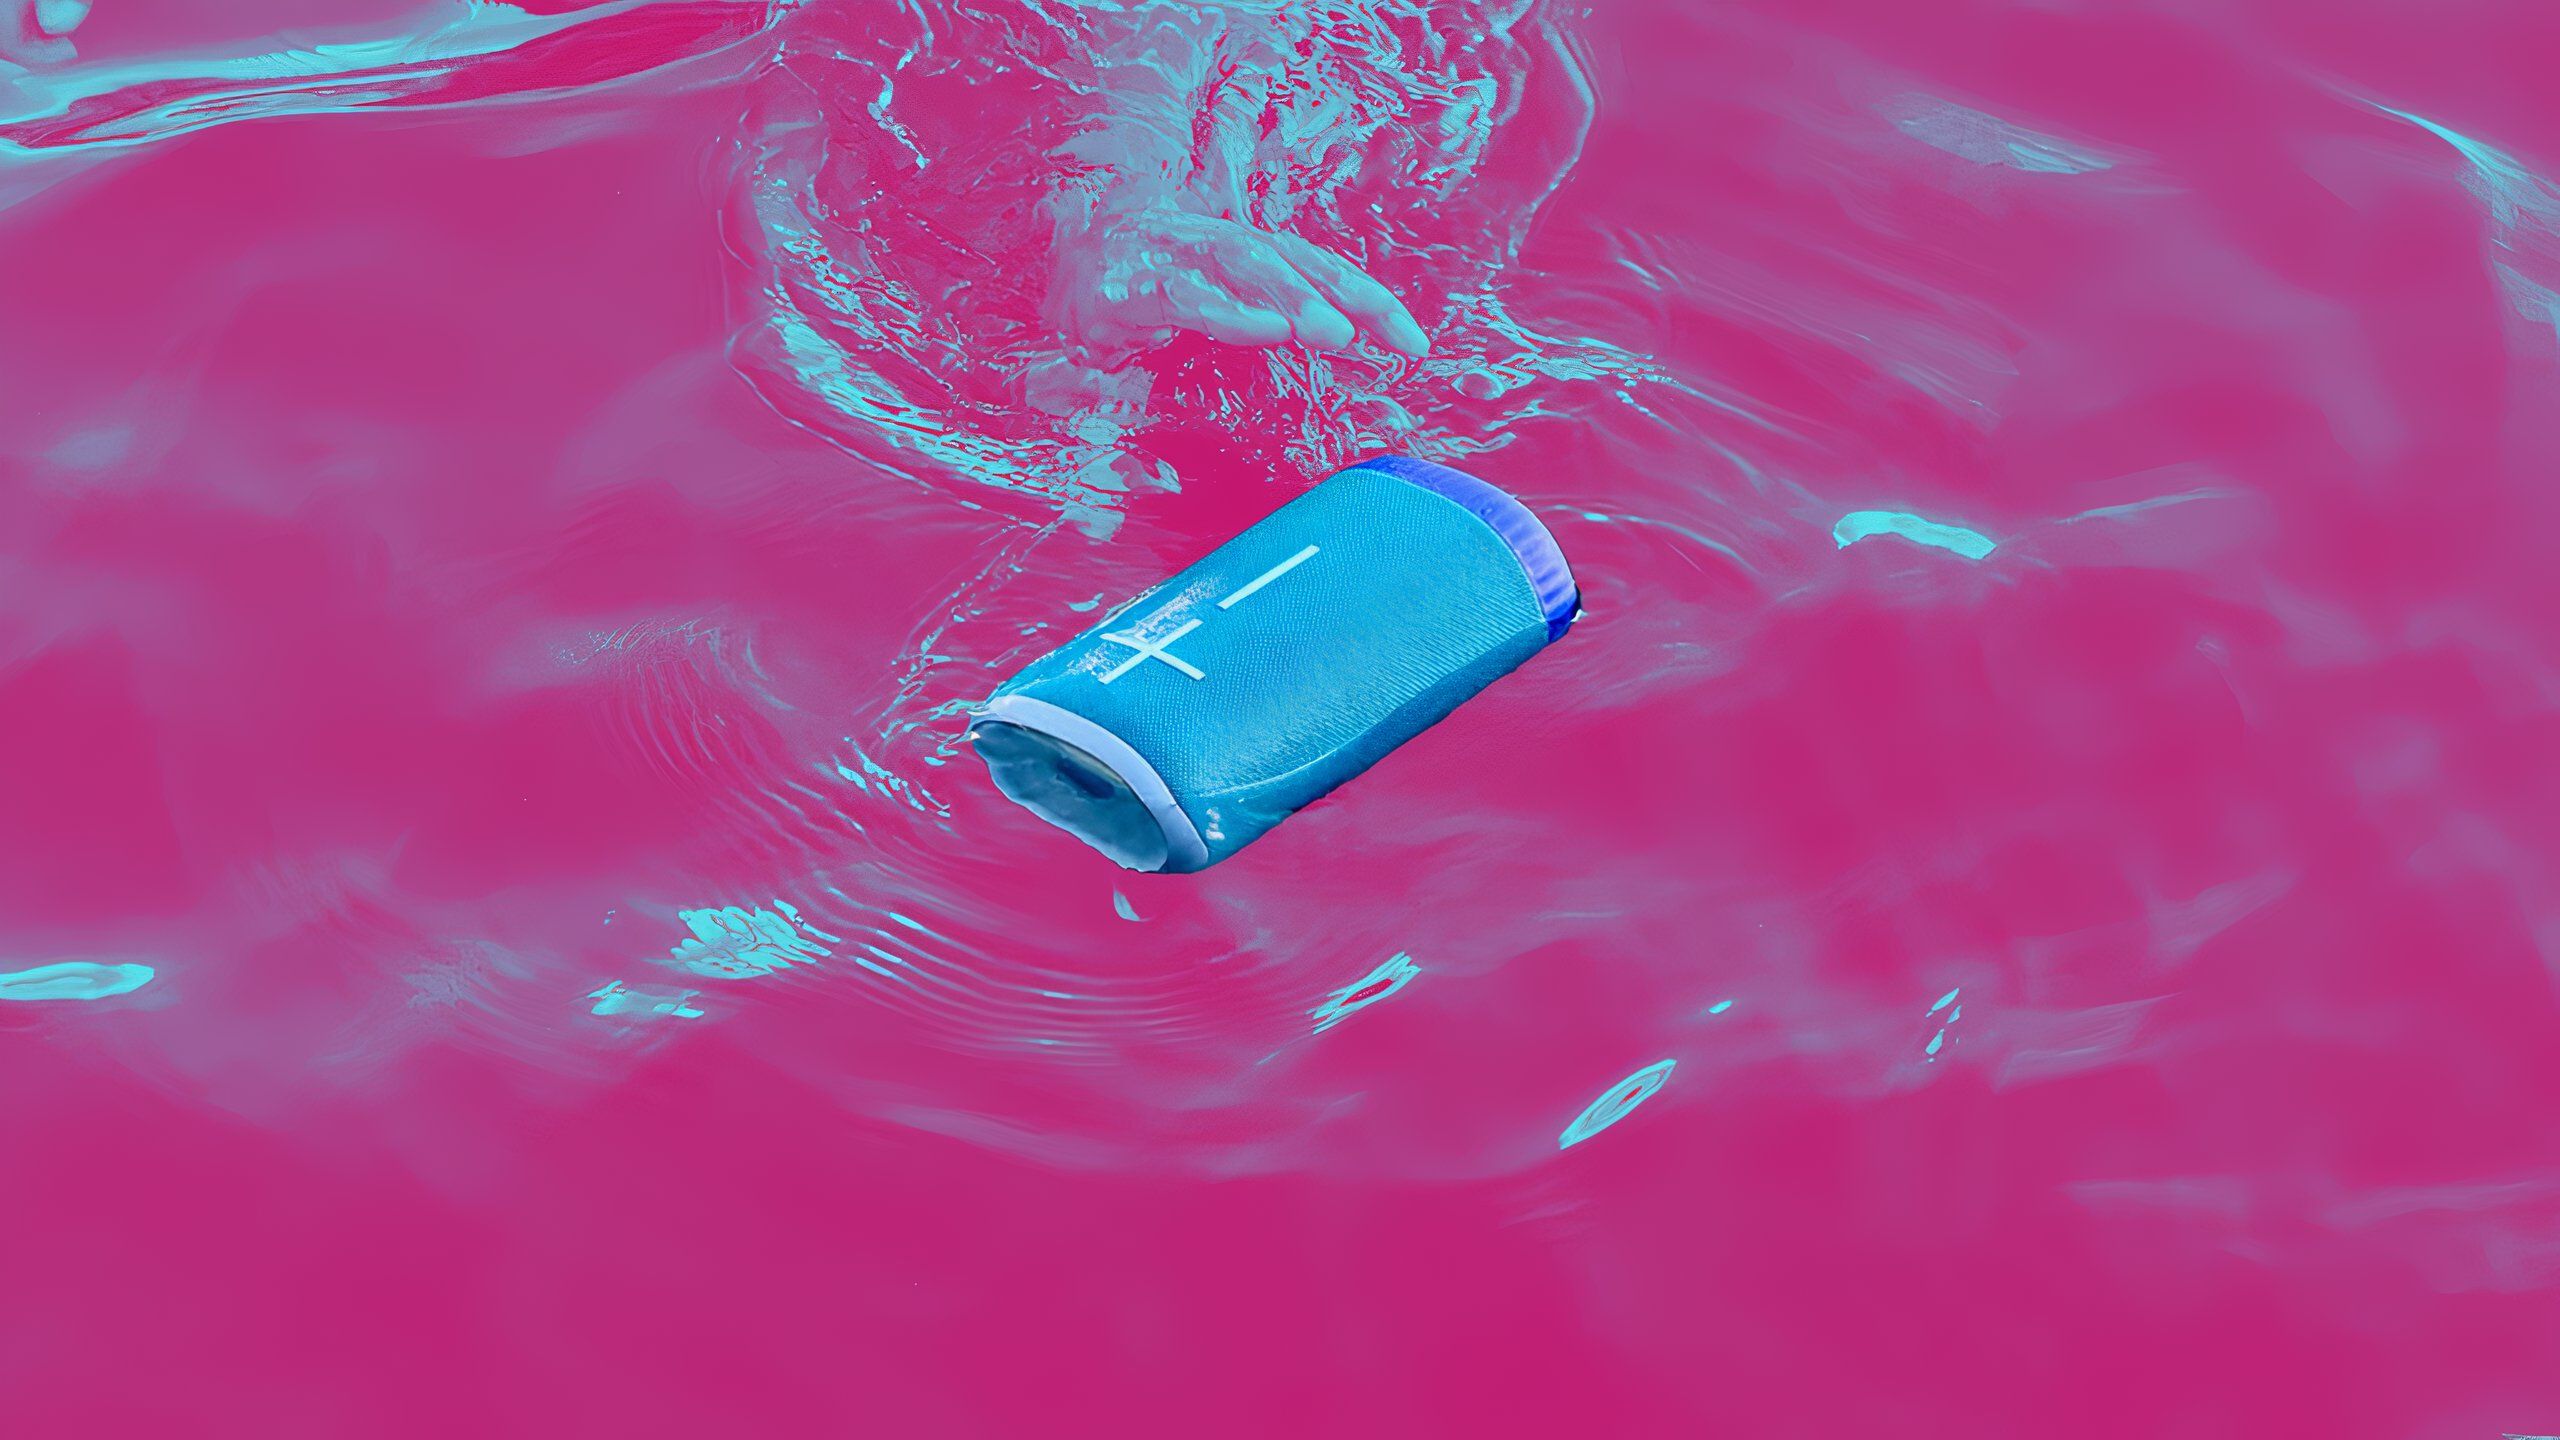 UE makes a splash with first ever floatable Epicboom speaker